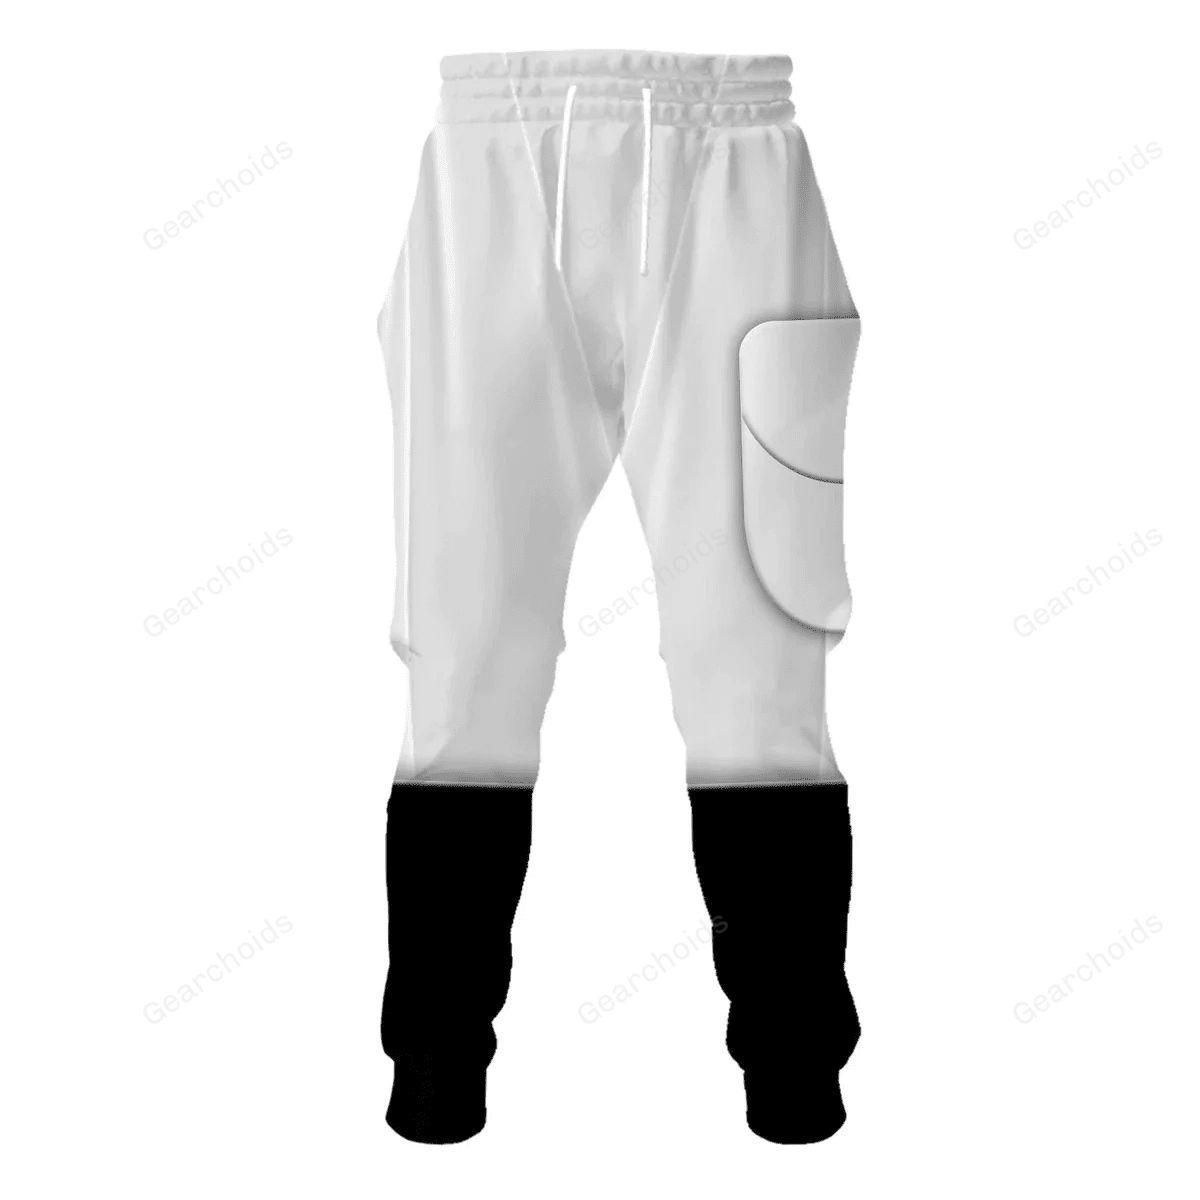 American Revolution Continental Marine Corps Officer Sweatpants